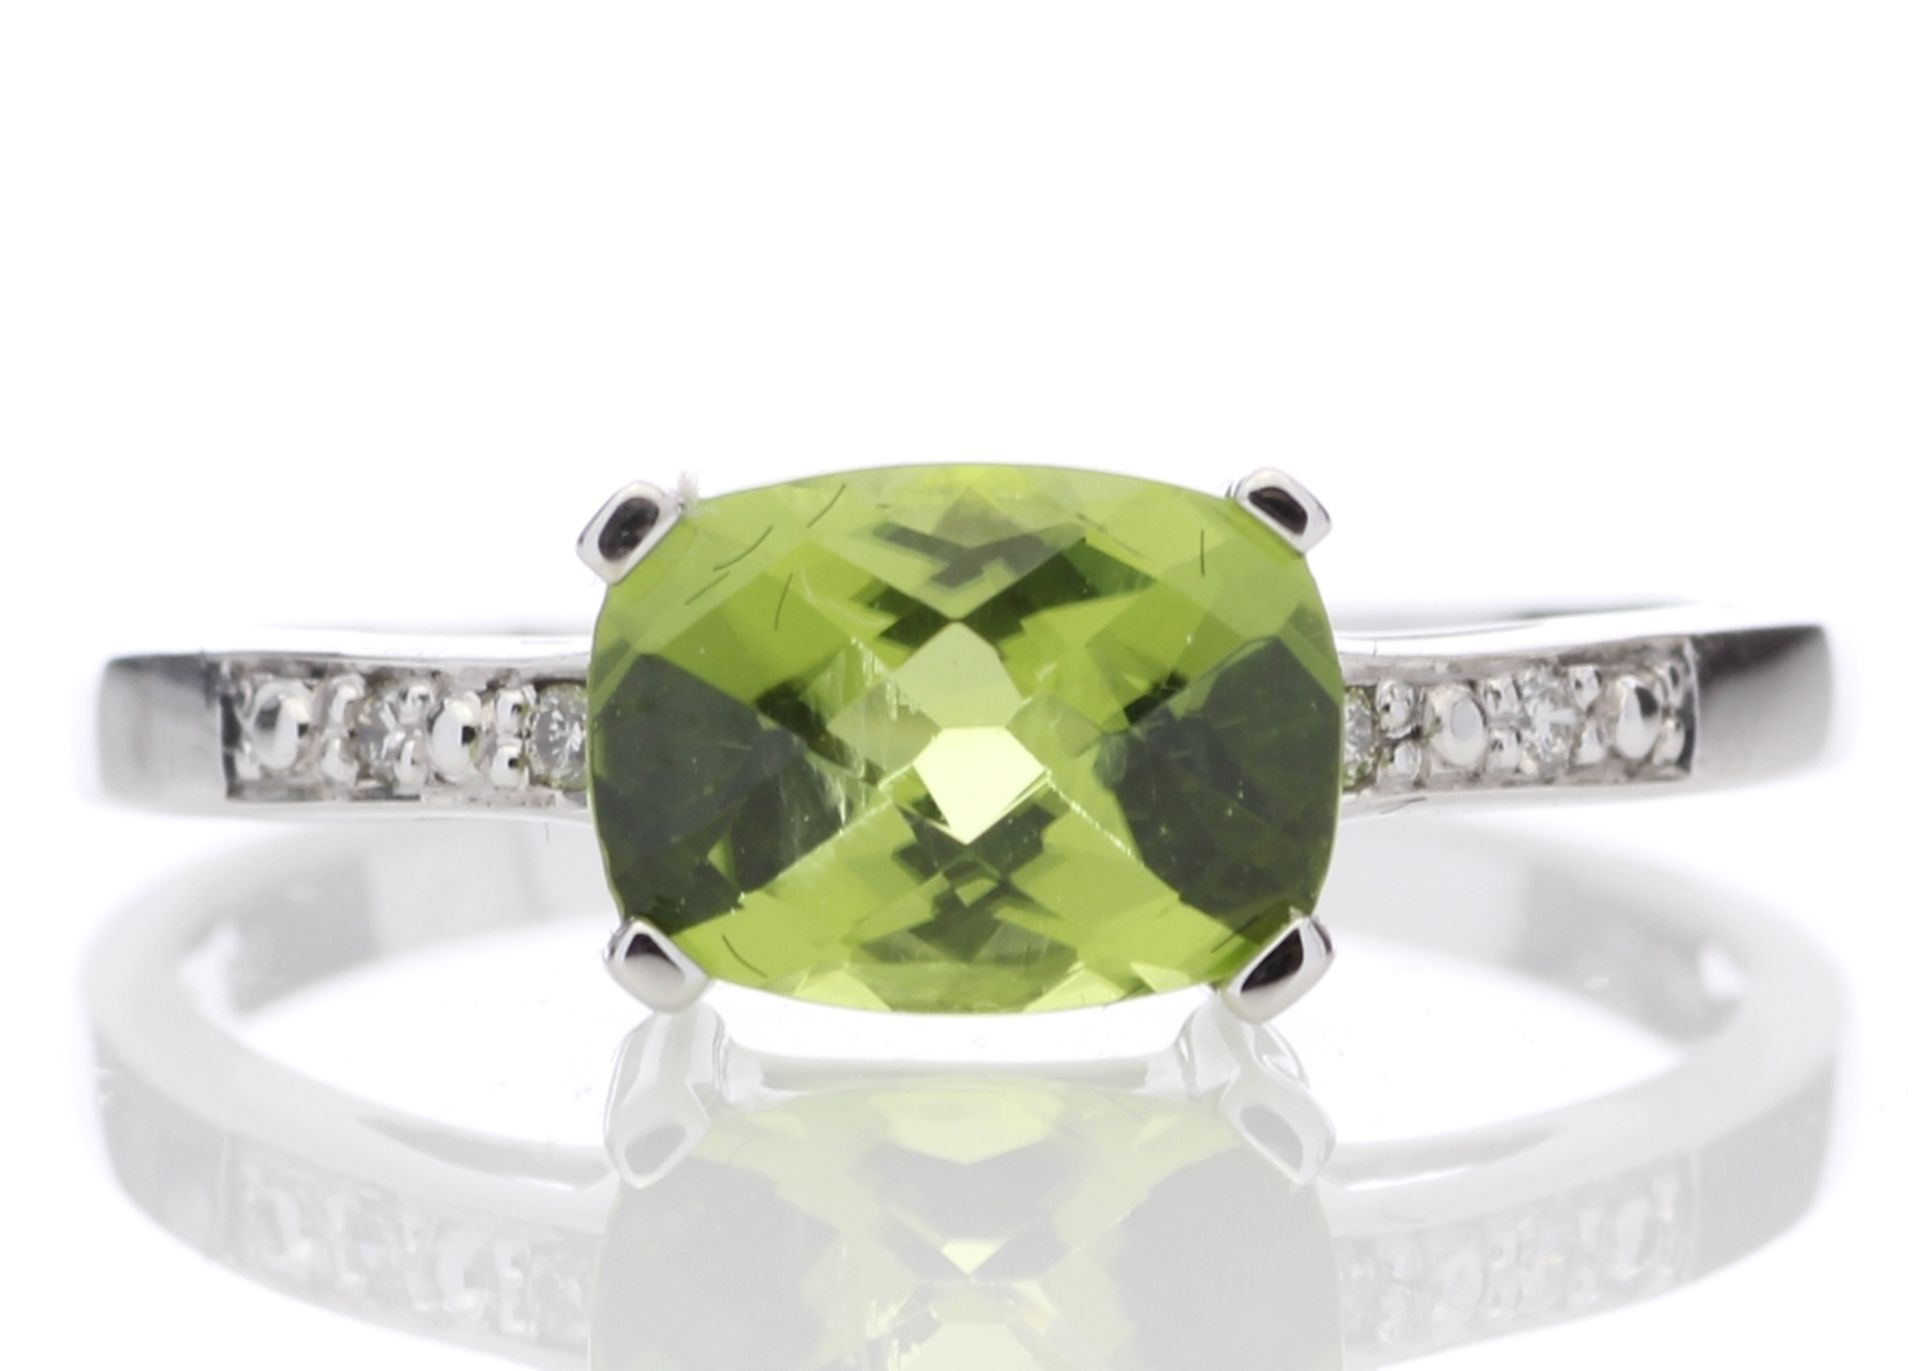 9ct White Gold Peridot Diamond Ring 0.05 Carats - Valued by GIE £1,595.00 - This stunning ring